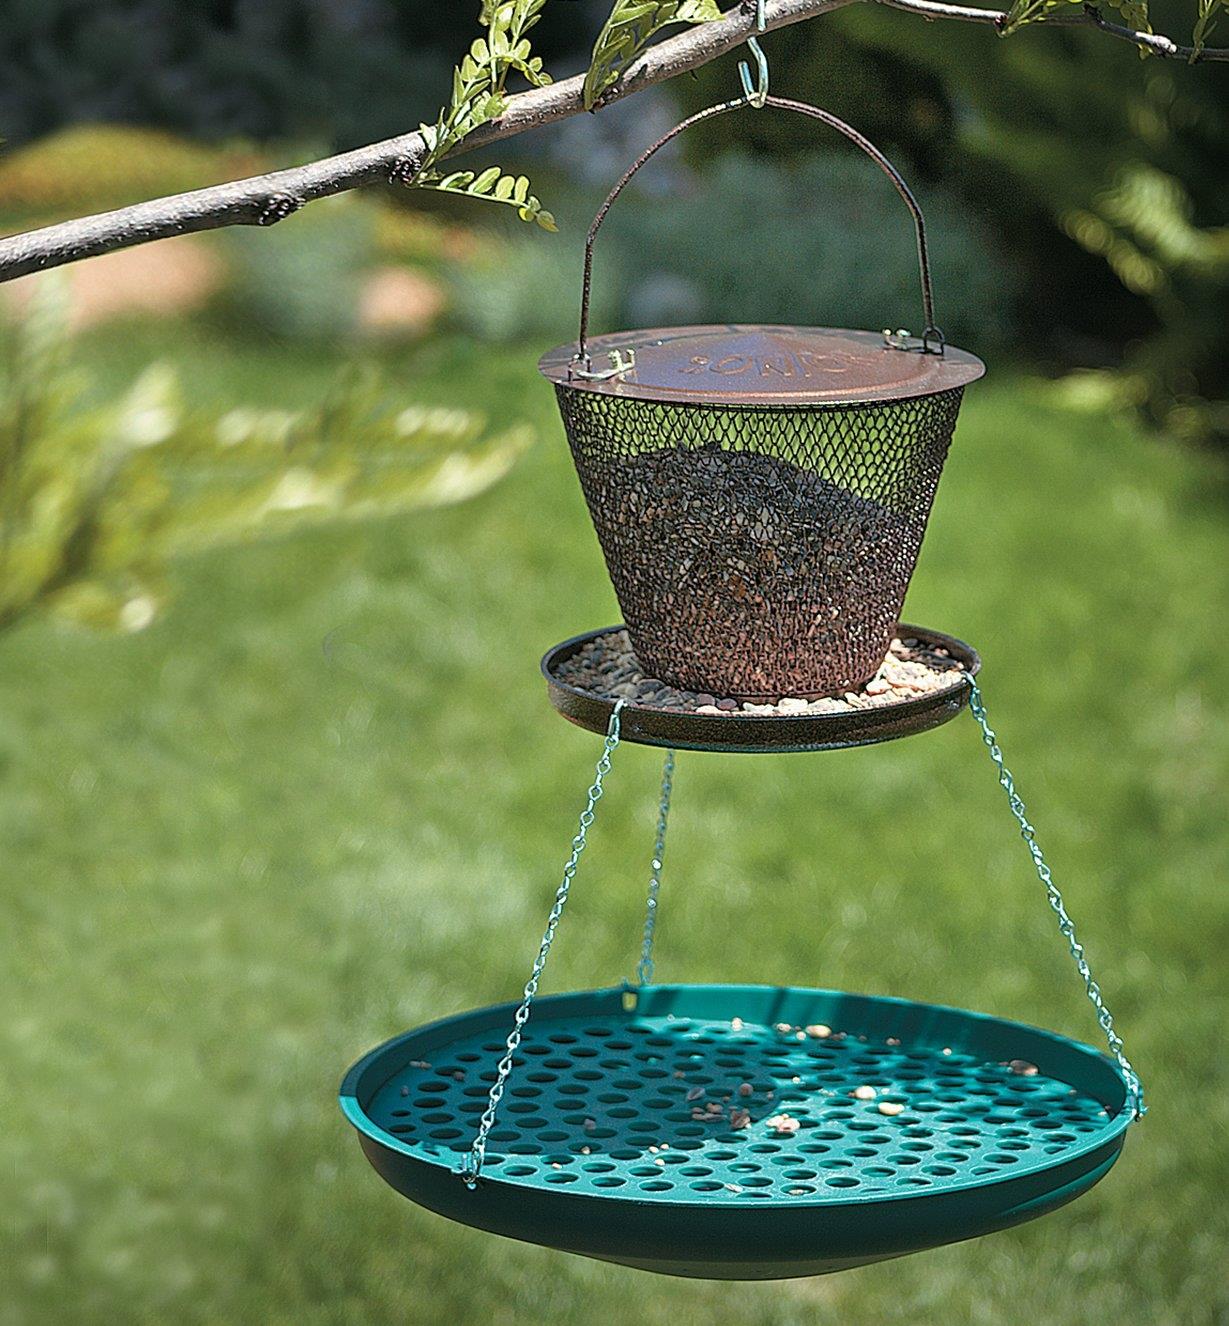 Seed Saucer hanging under a collapsible bird feeder